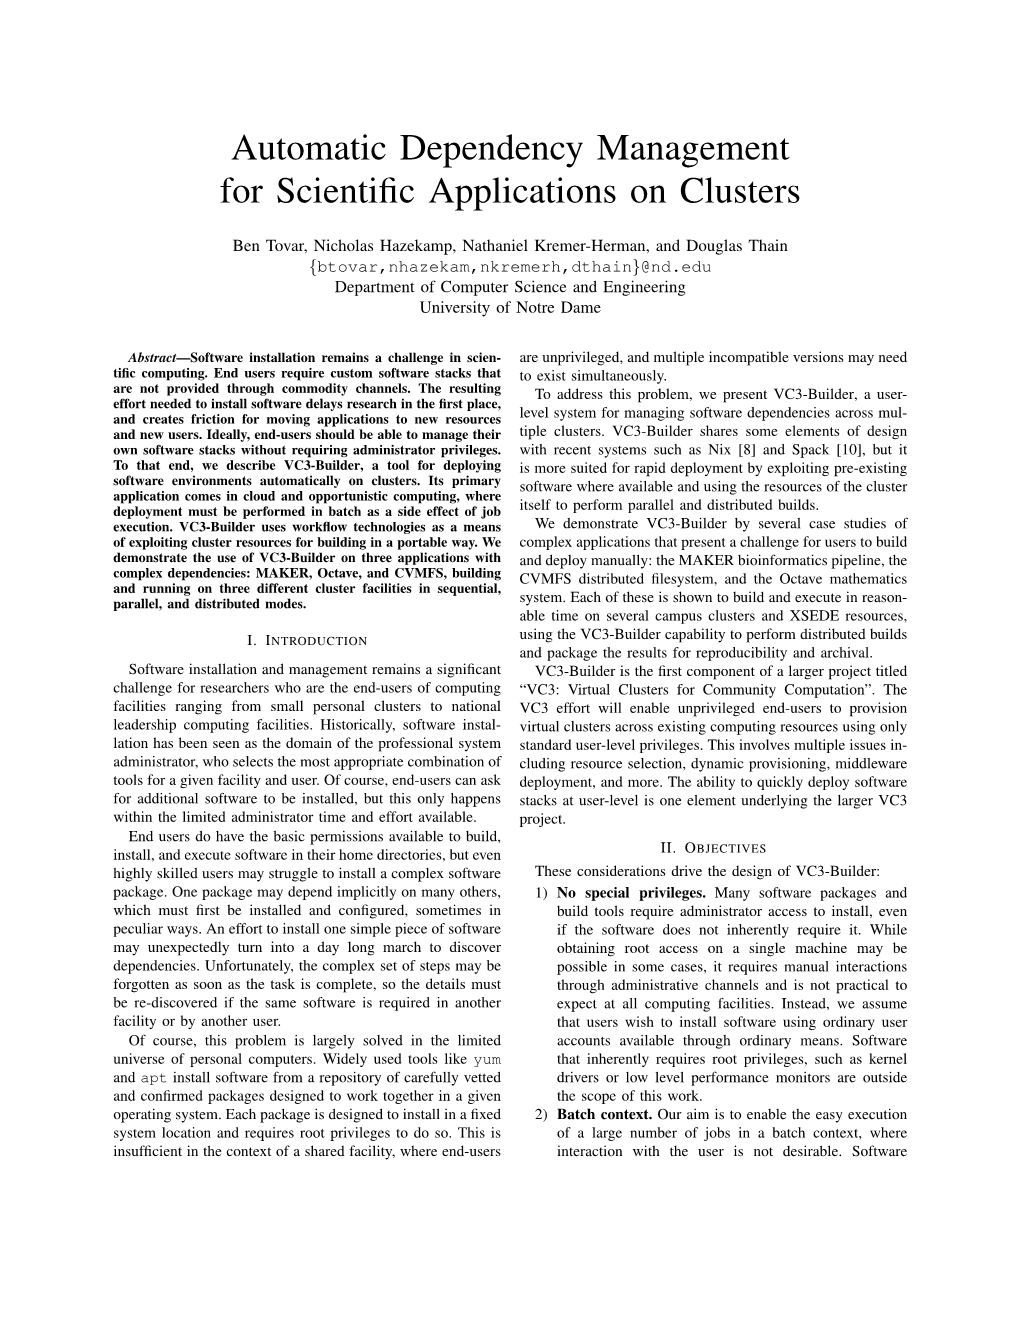 Automatic Dependency Management for Scientific Applications on Clusters